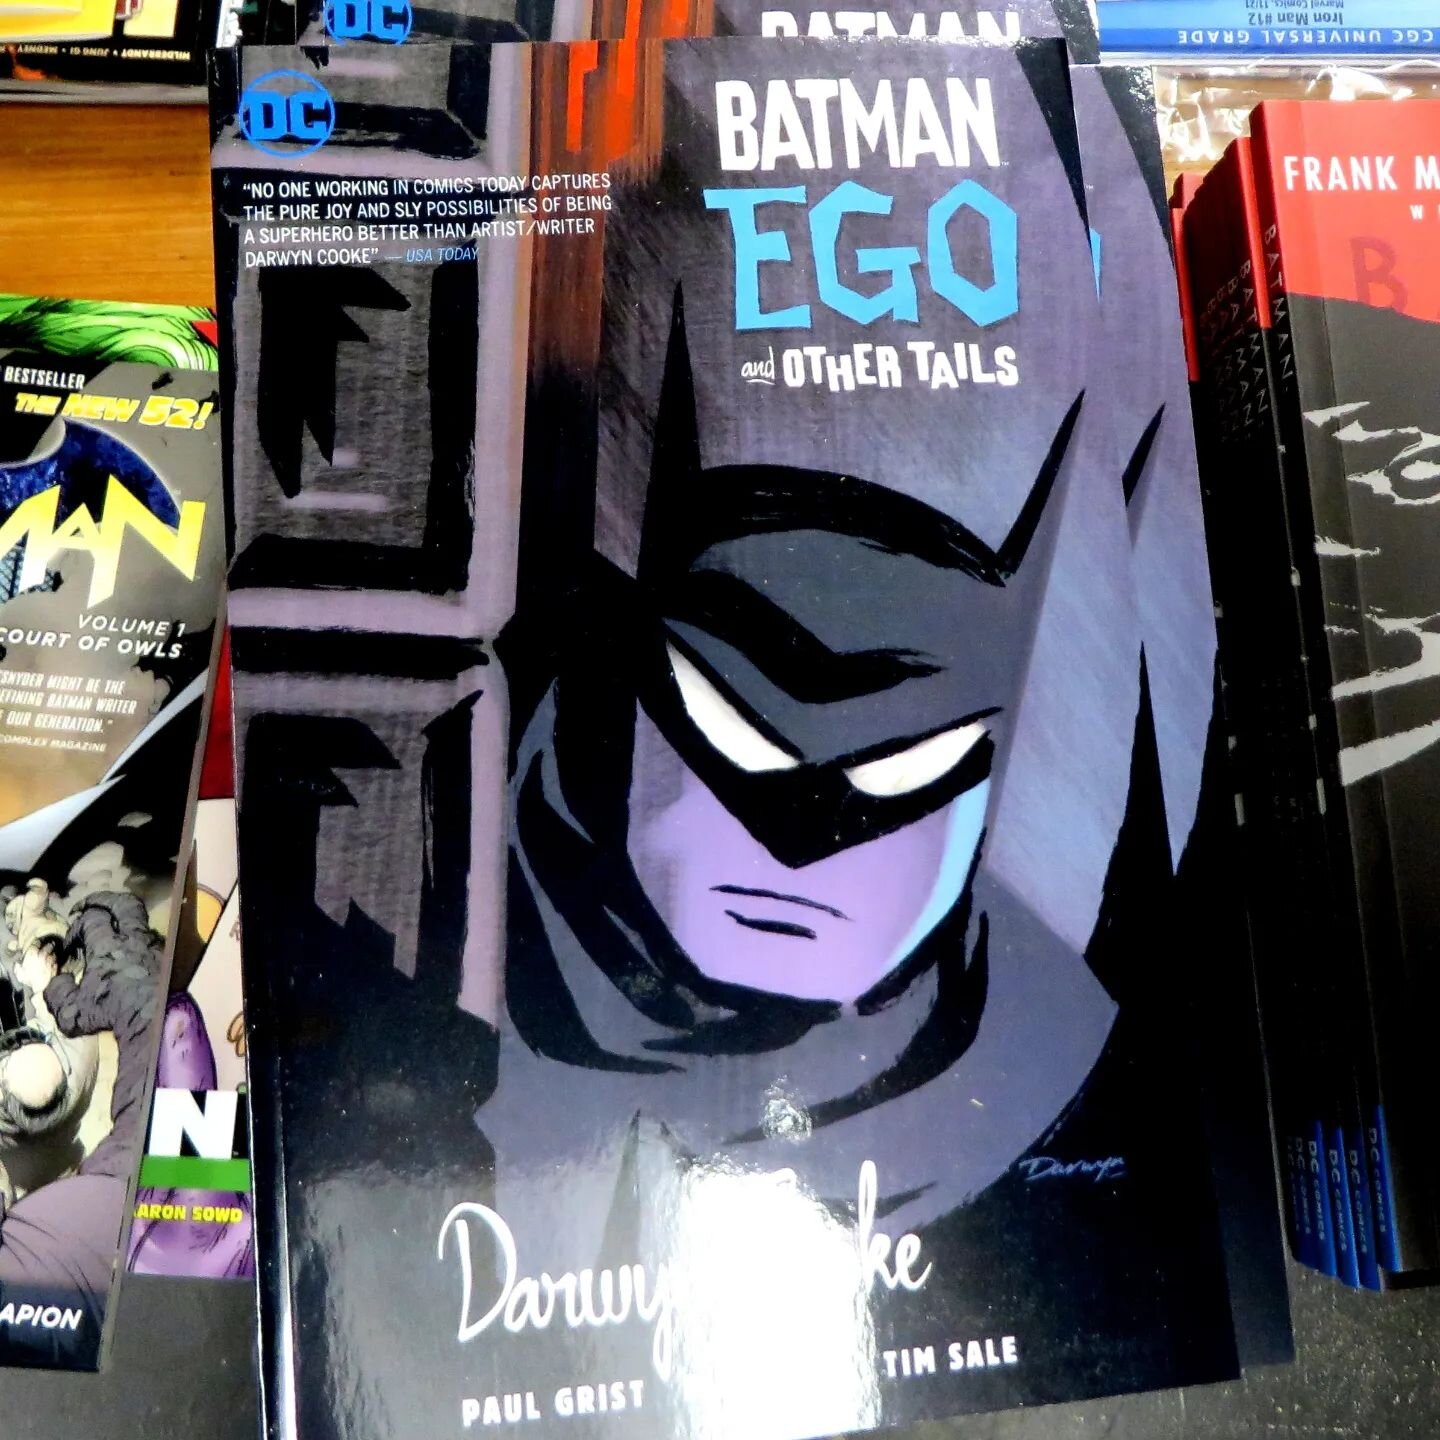 Are you as excited for the new Batman flick as we are? In anticipation we stocked up on Batman titles, including the stories the director explained were his inspiration. Come get yours now, start with BATMAN EGO!

#Batman #thebatman #batmanego #batma